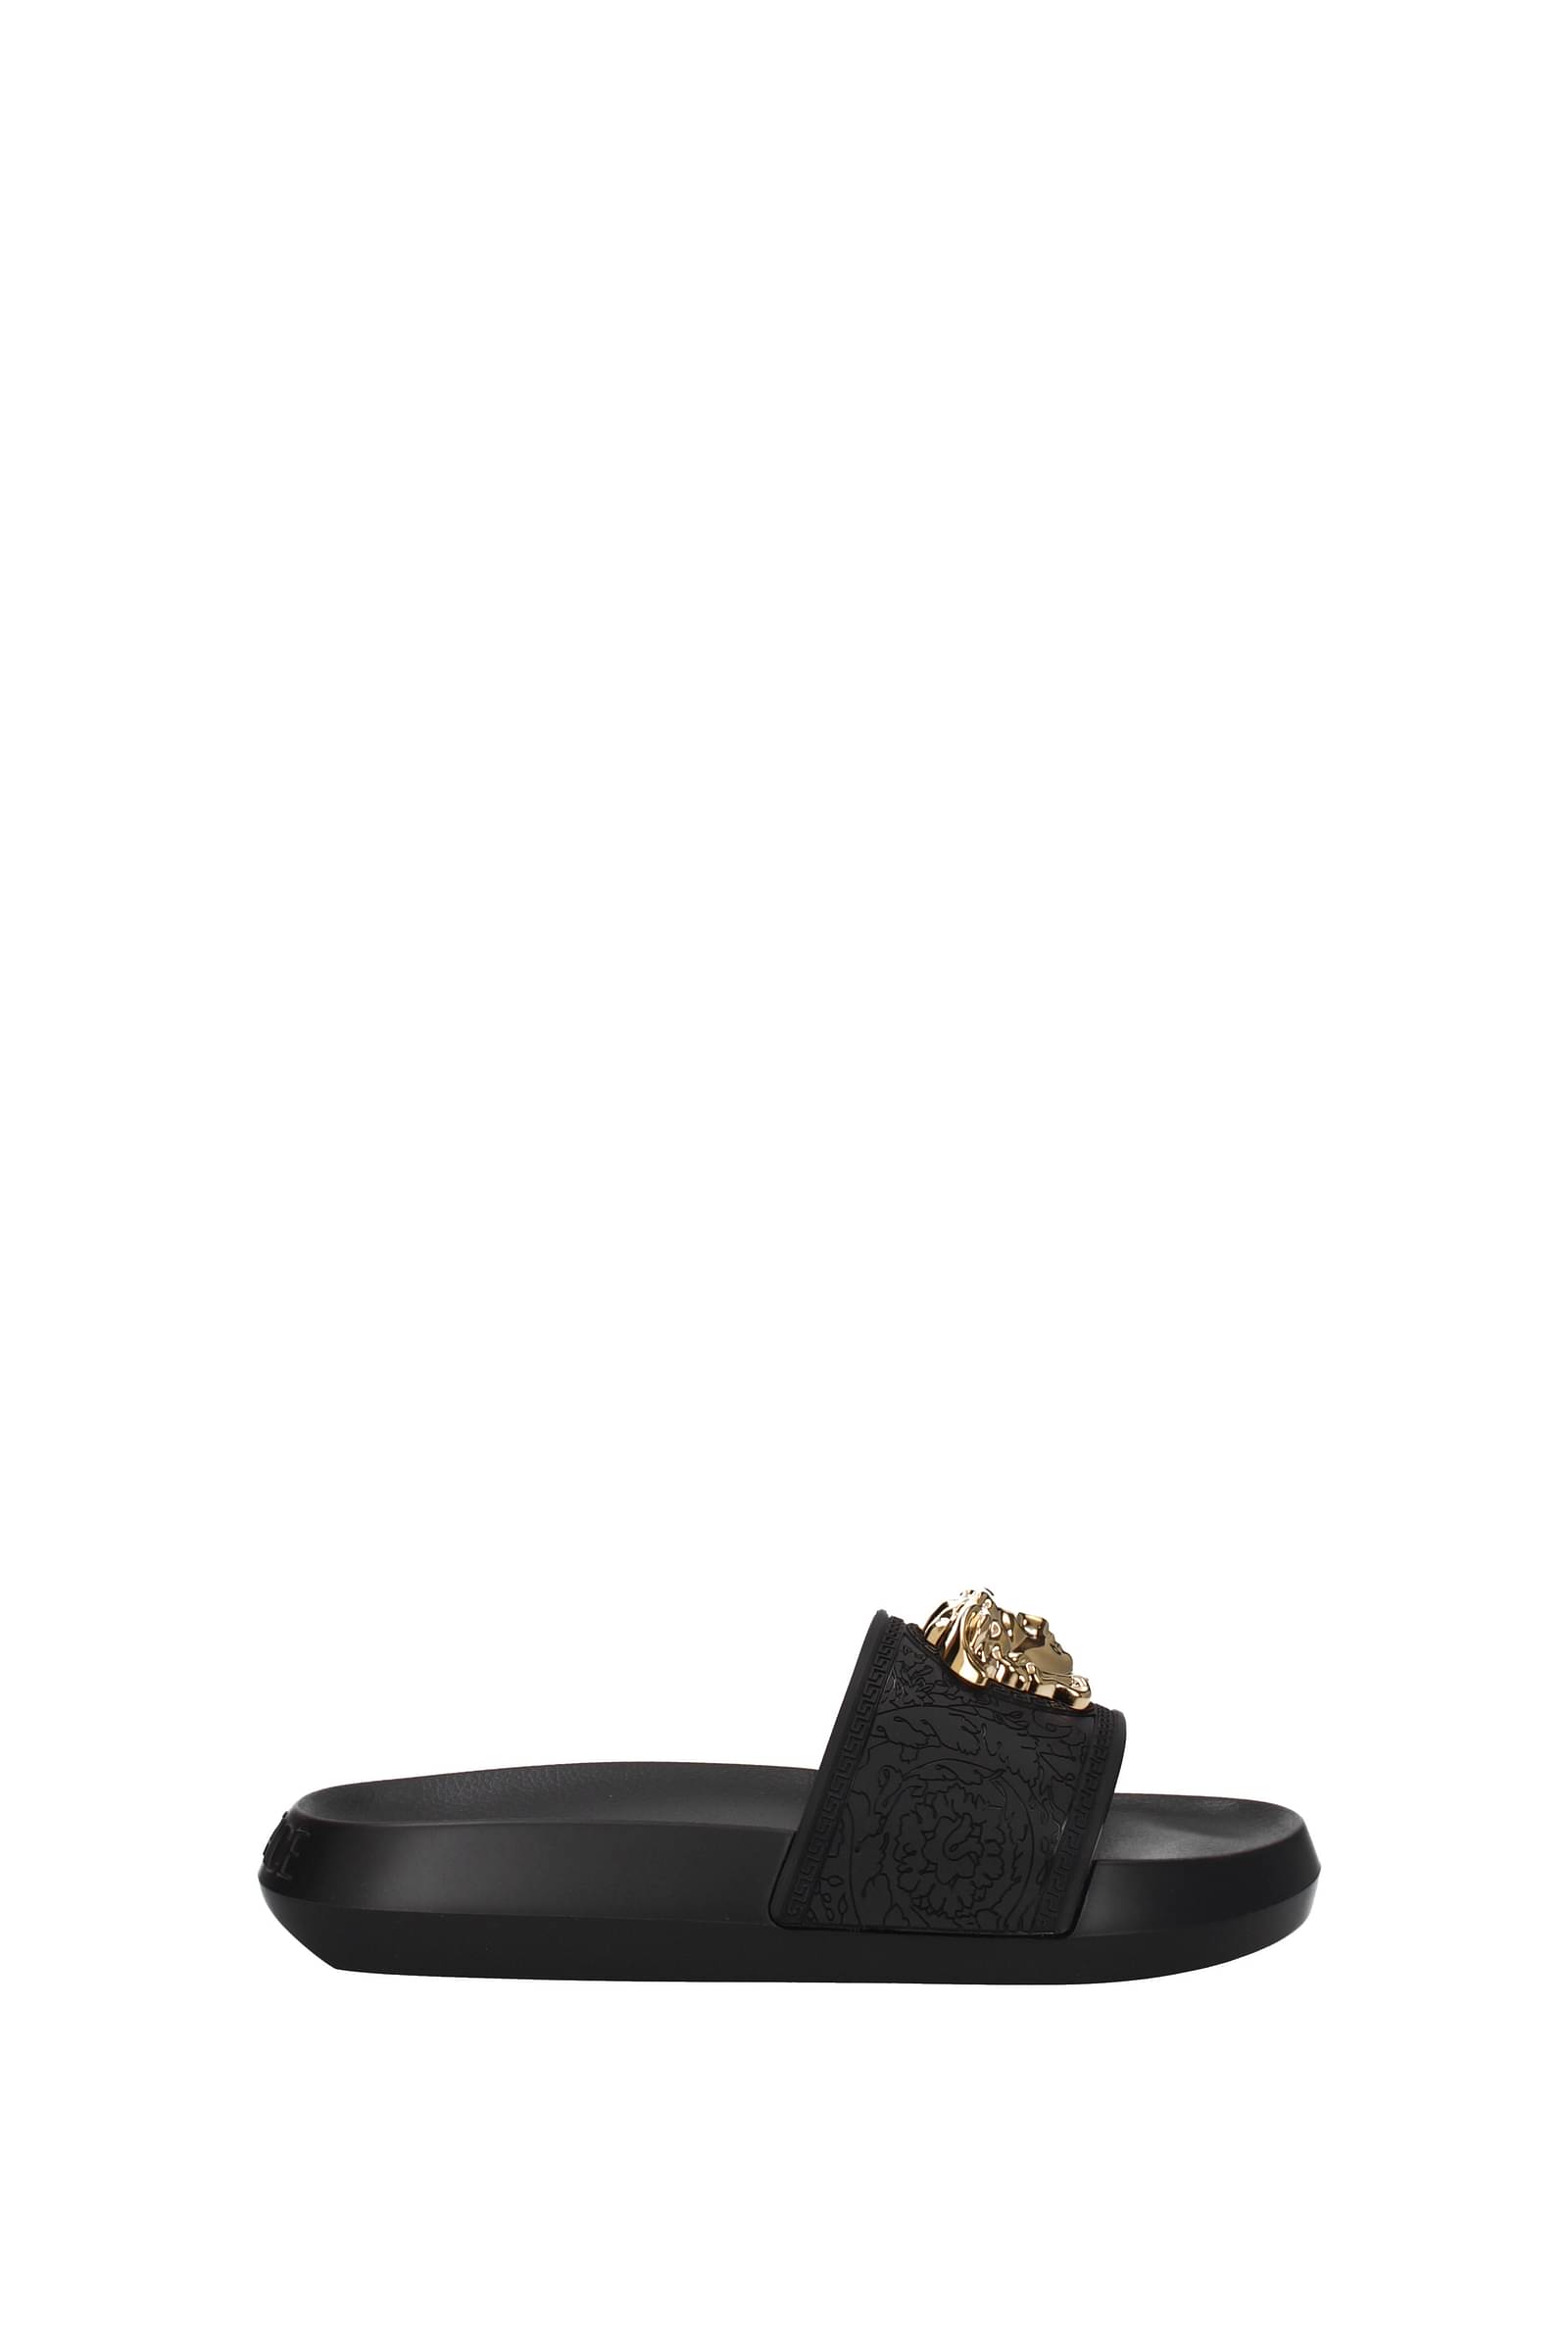 VERSACE FAUX FUR PALAZZO SLIPPERS – Enzo Clothing Store